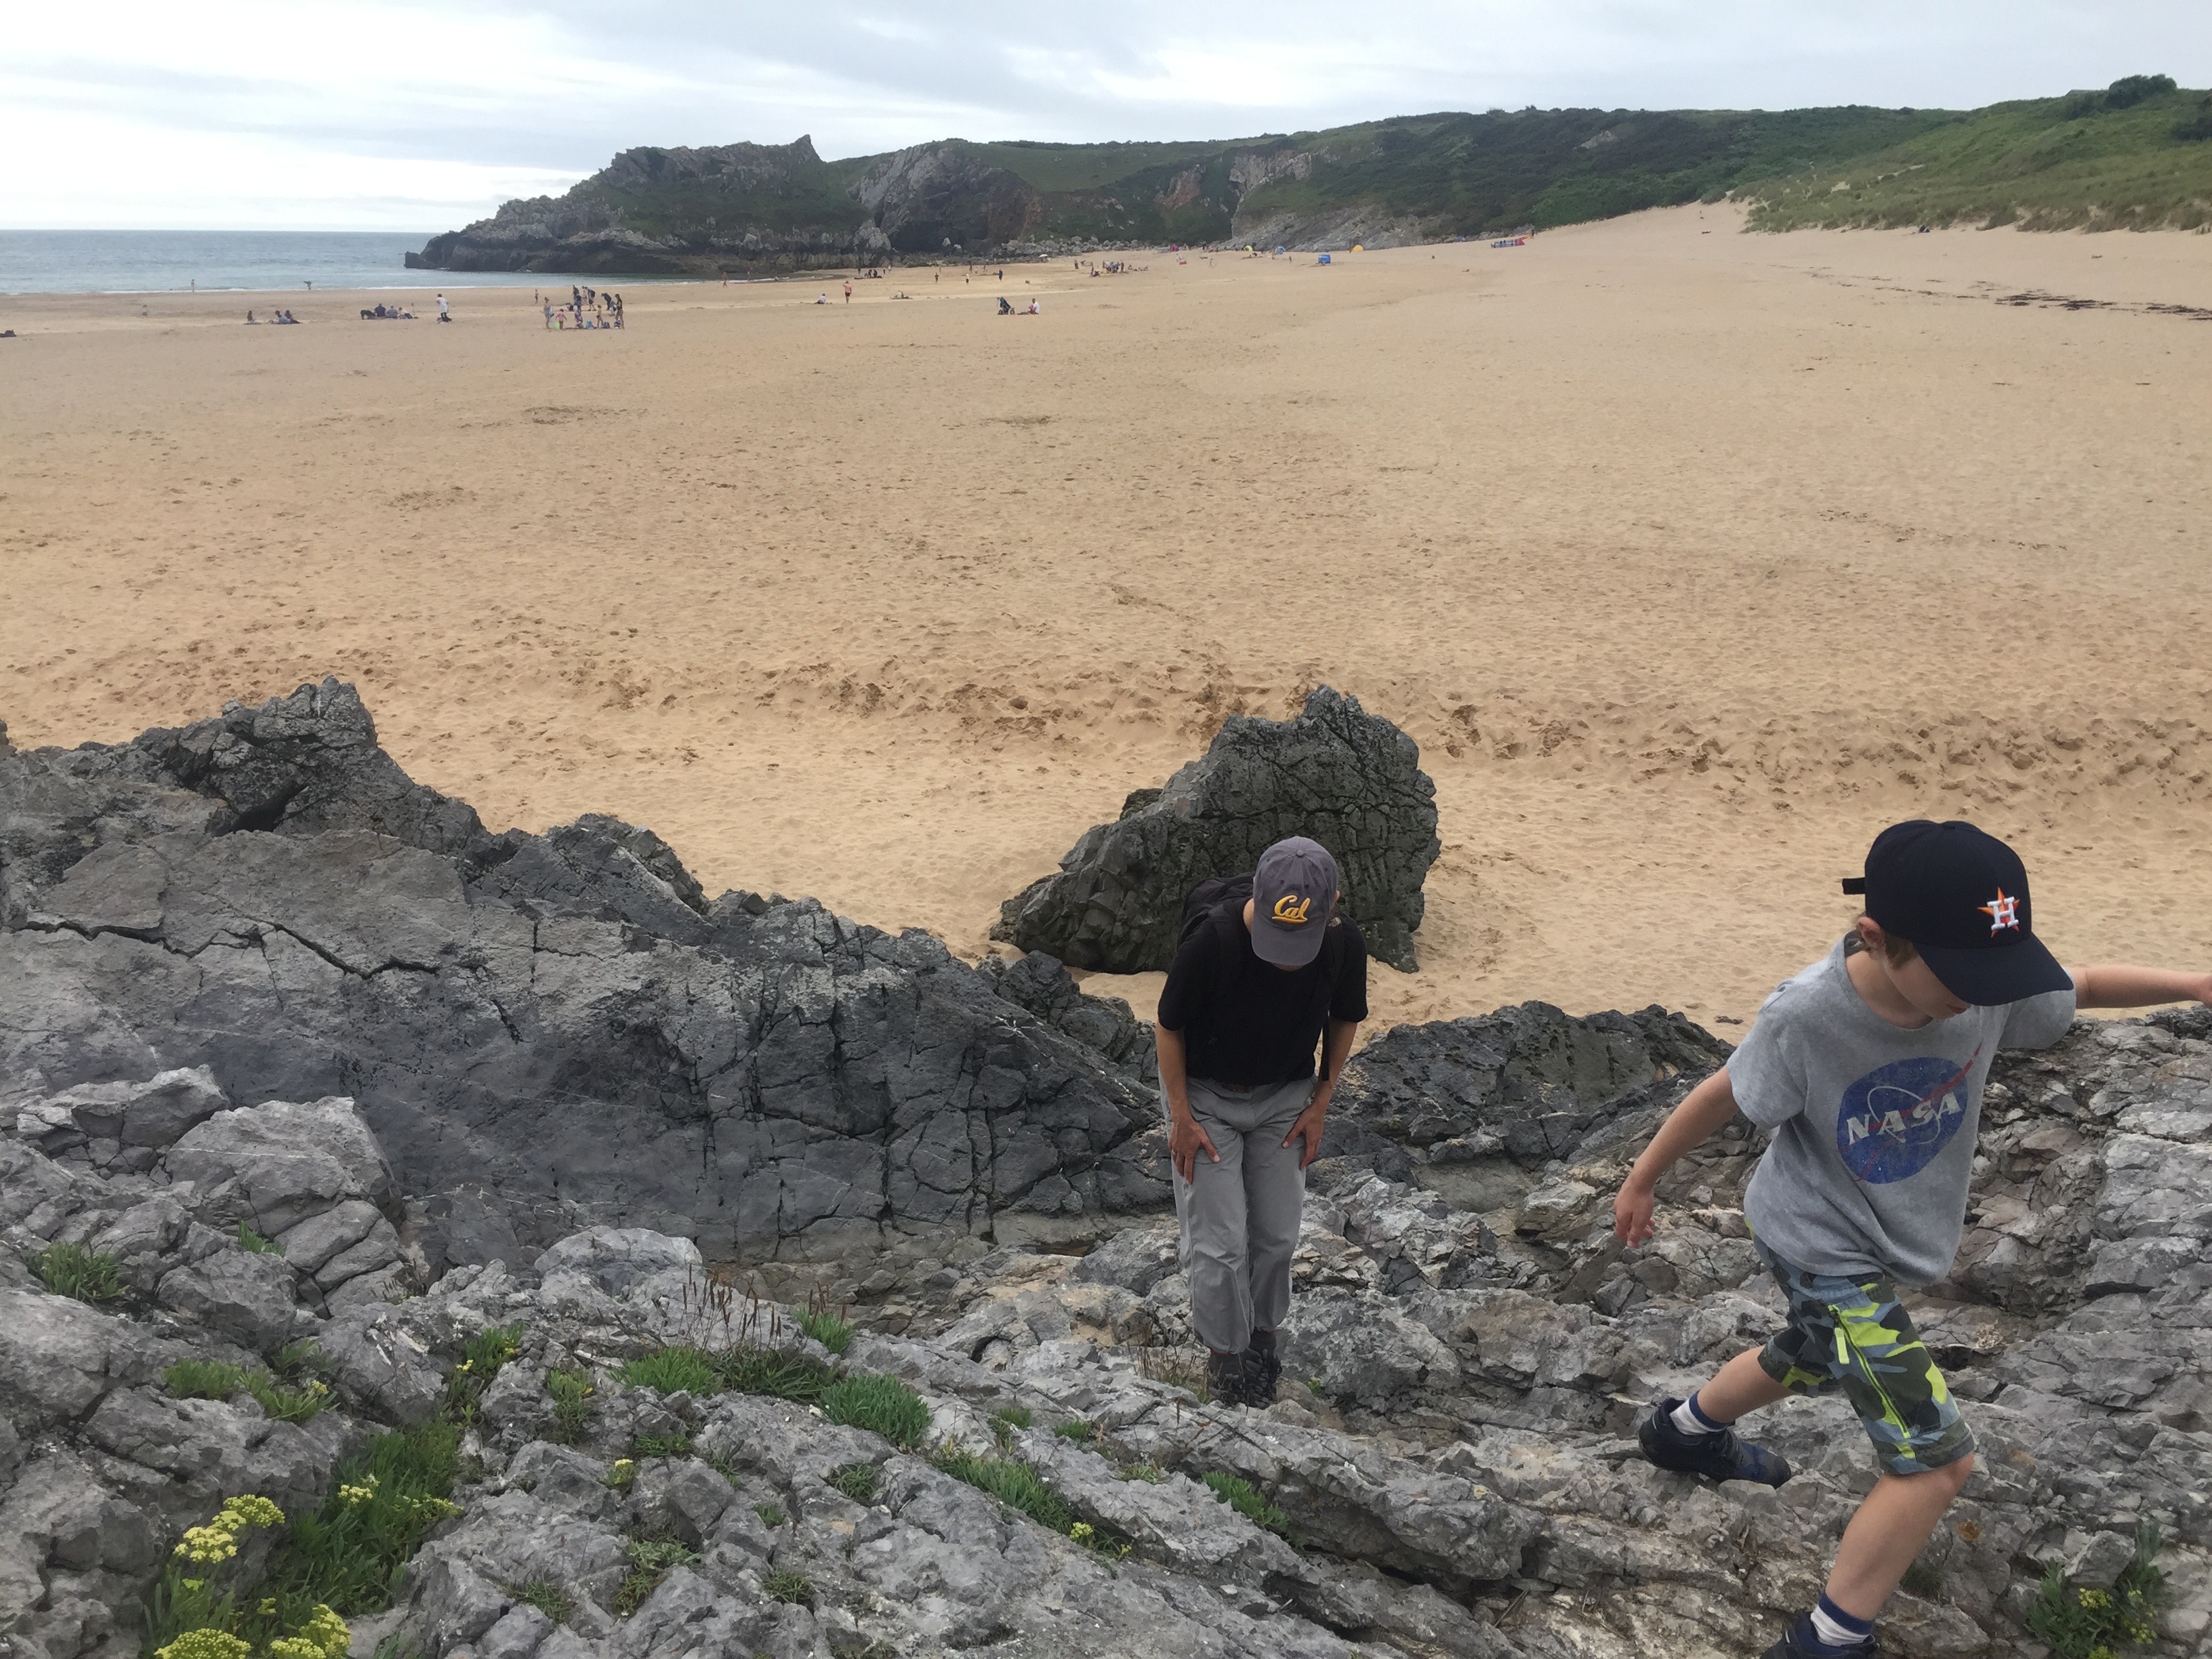 Picture shows Maggie and her son scrambling over grey rocks on the beach. Both are wearing caps and looking down. You can see hills in the background. 